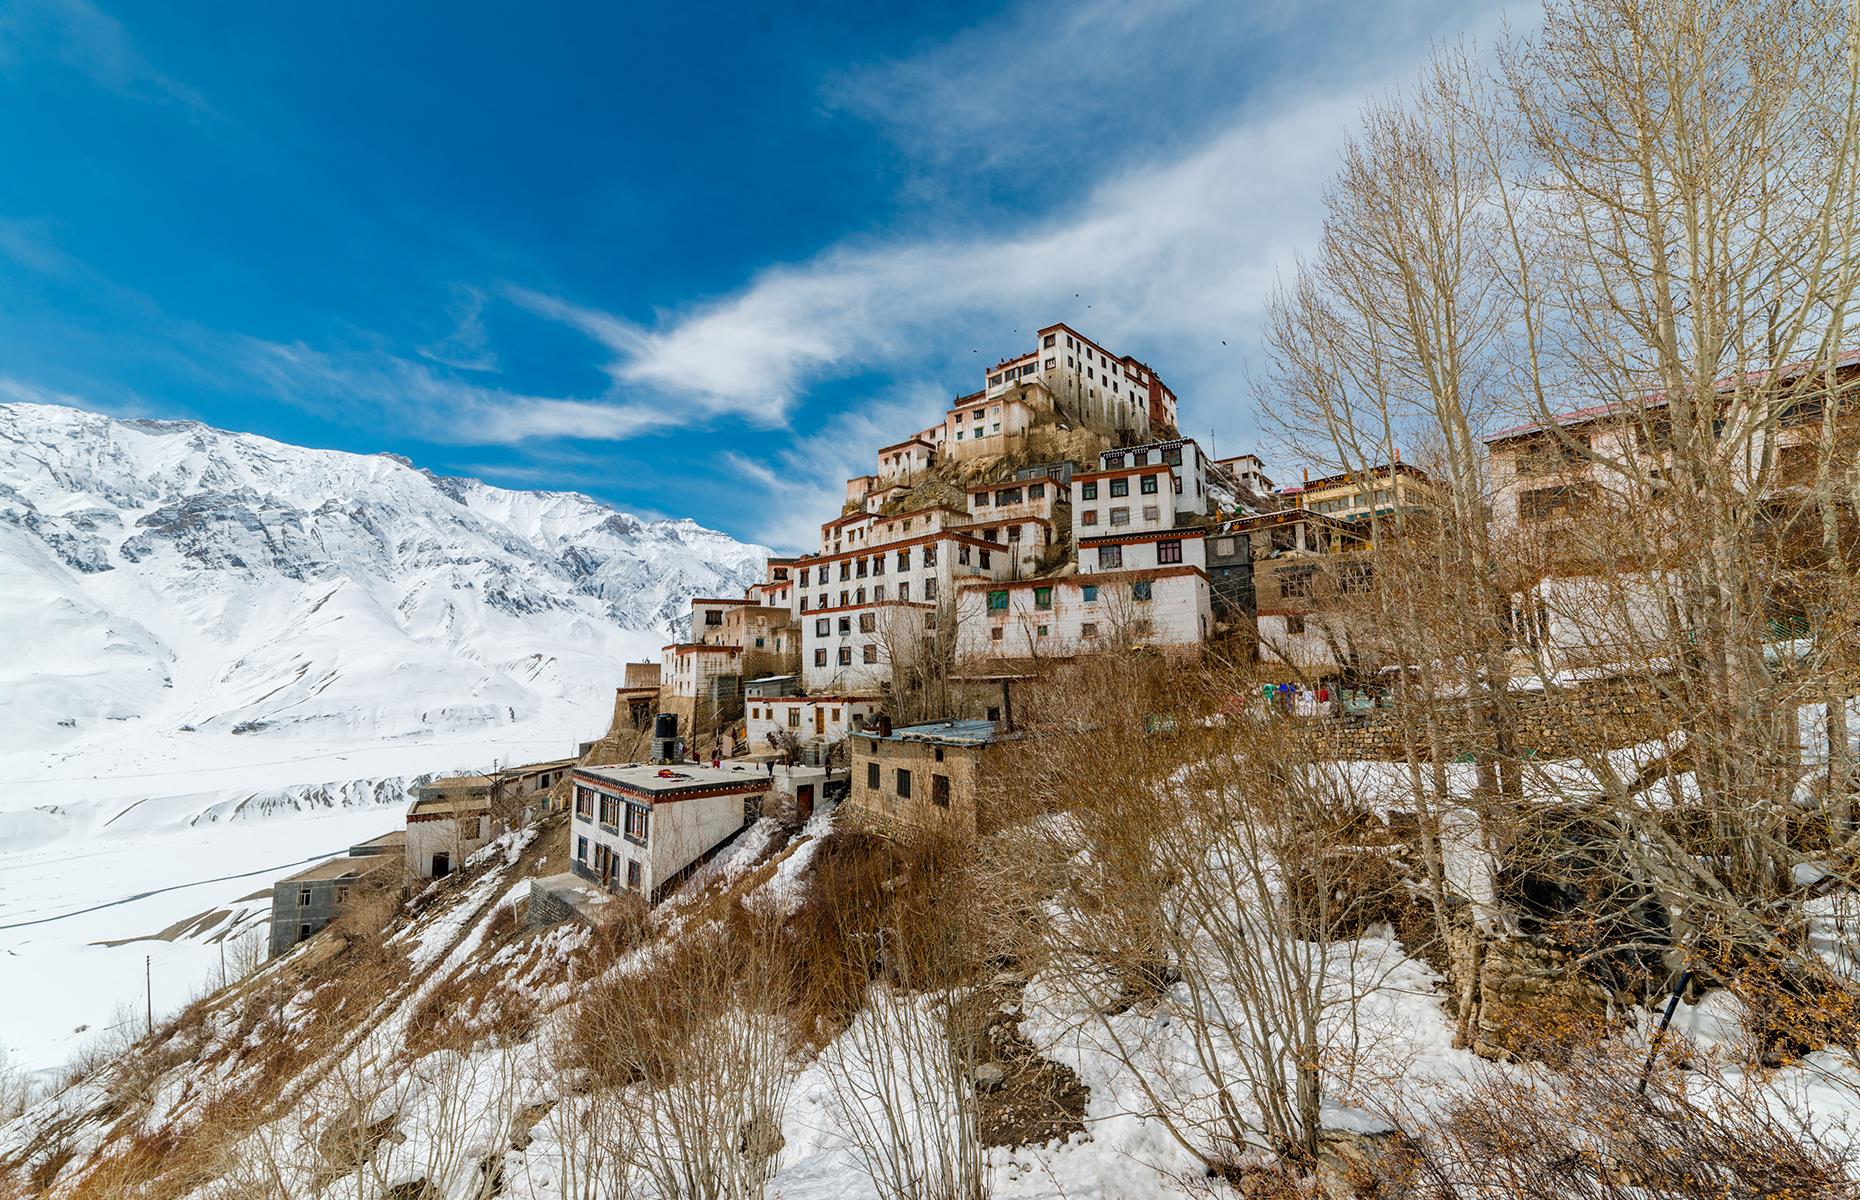 Once part of Tibet, this remote valley is home to snowy peaks, glaciers, and Buddhist monasteries perched on rocky pinnacles with colorful prayer flags fluttering in the breeze. Trek up into mountains to absorb the serenity and be sure to visit Tabo Monastery, one of the oldest in the western Himalayas and a treasure trove of ancient art.